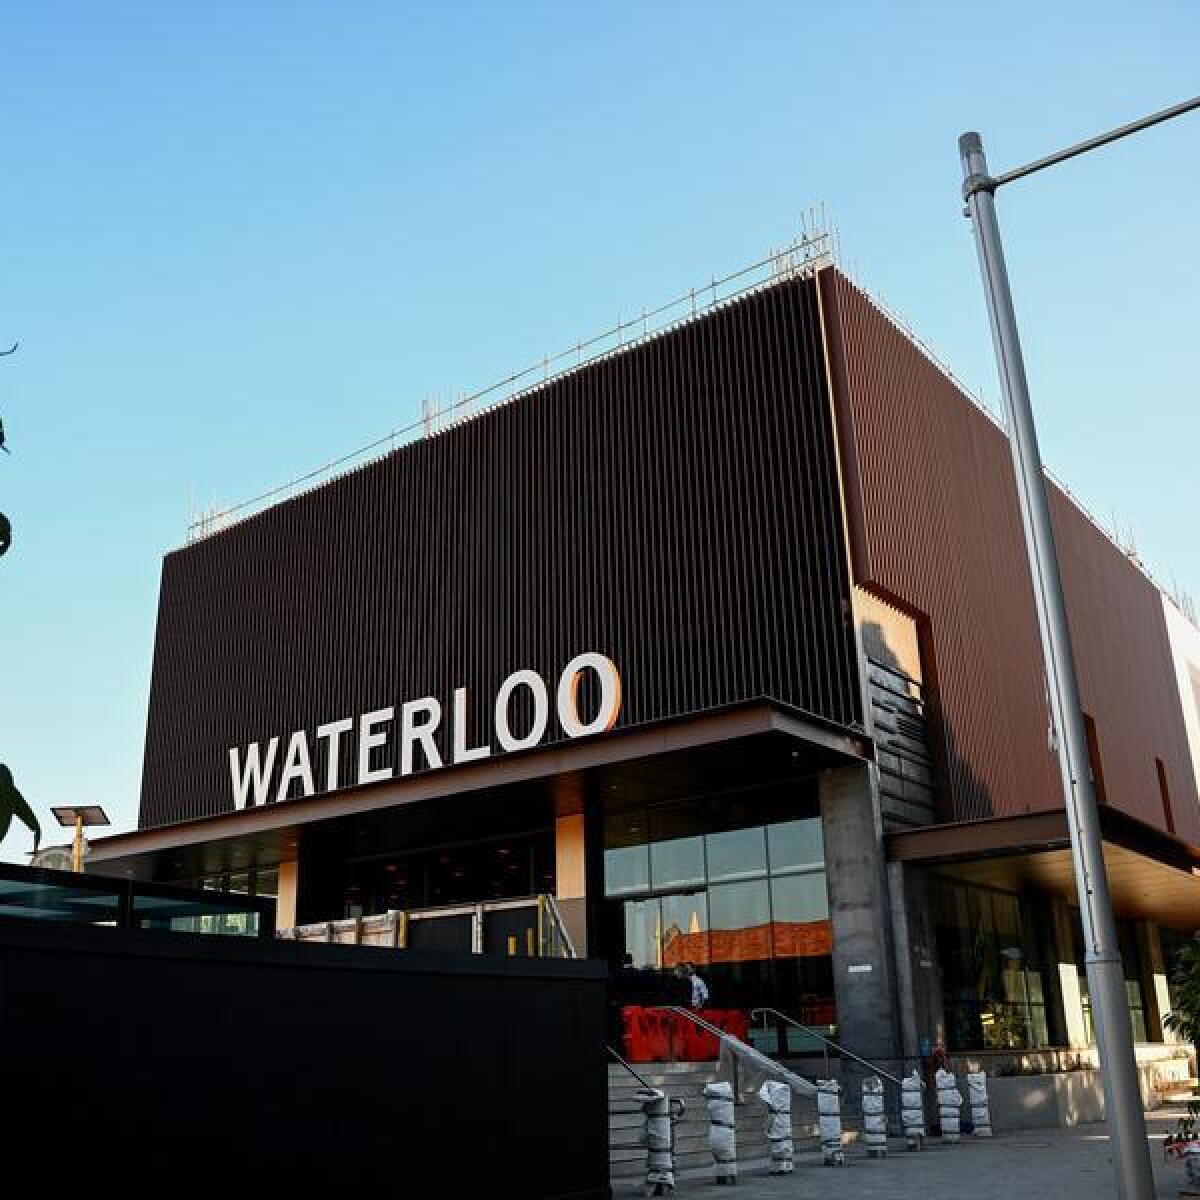 The new Waterloo Metro Station in Sydney